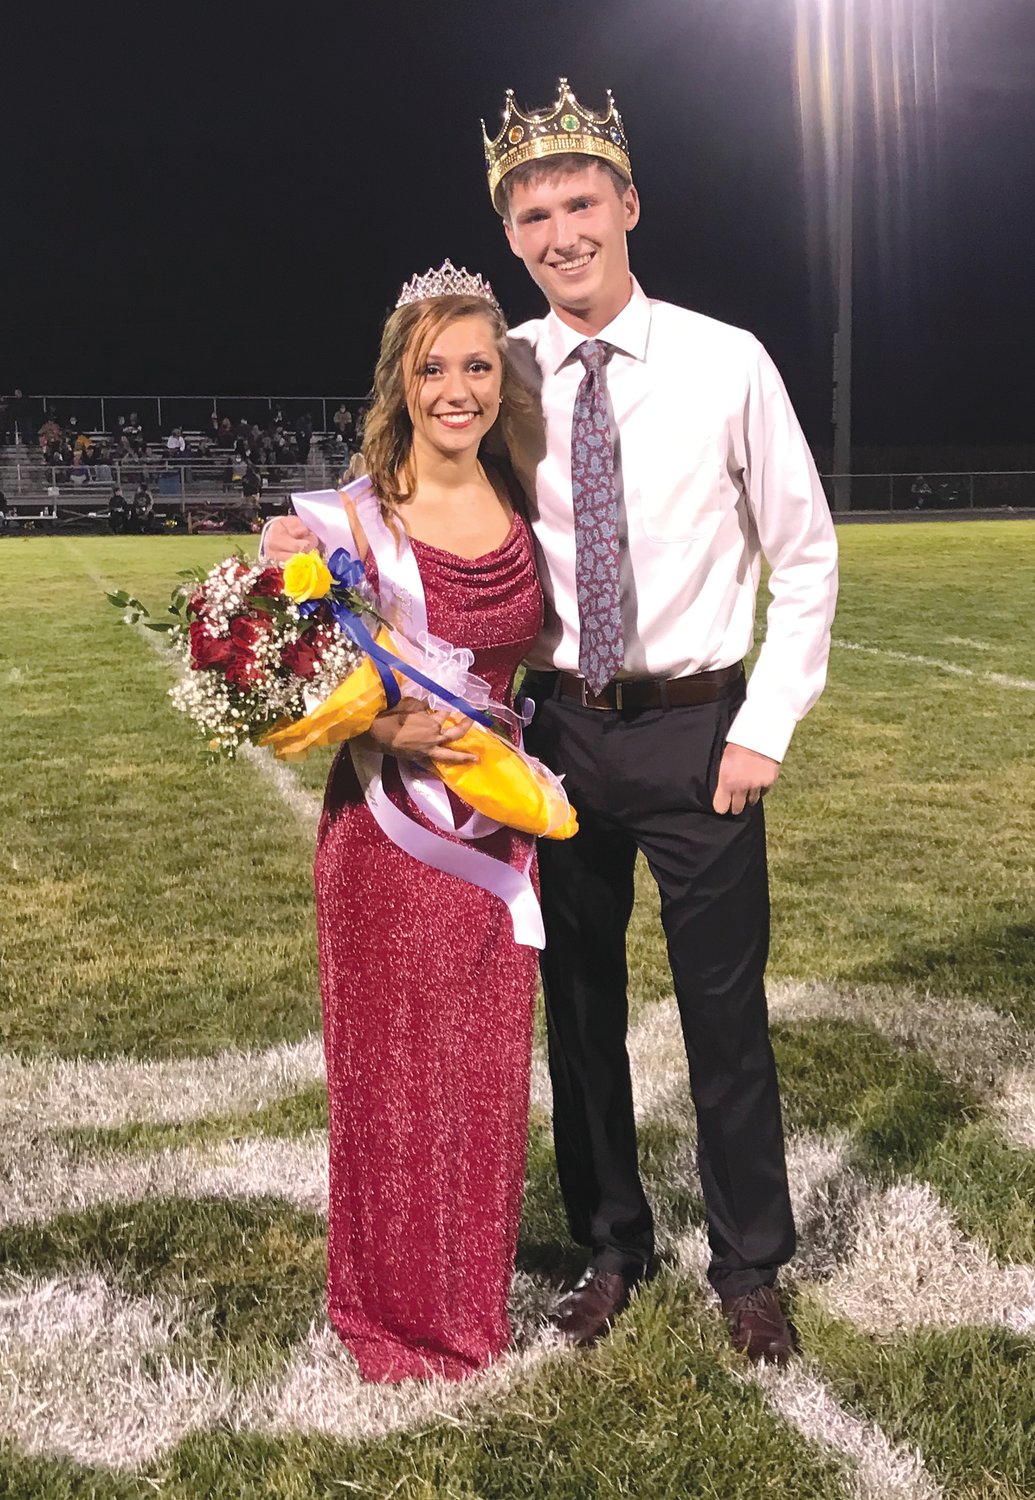 Marley Massey and Sawyer Keeling were crowned homecoming queen and king at Fountain Central High School on Friday.